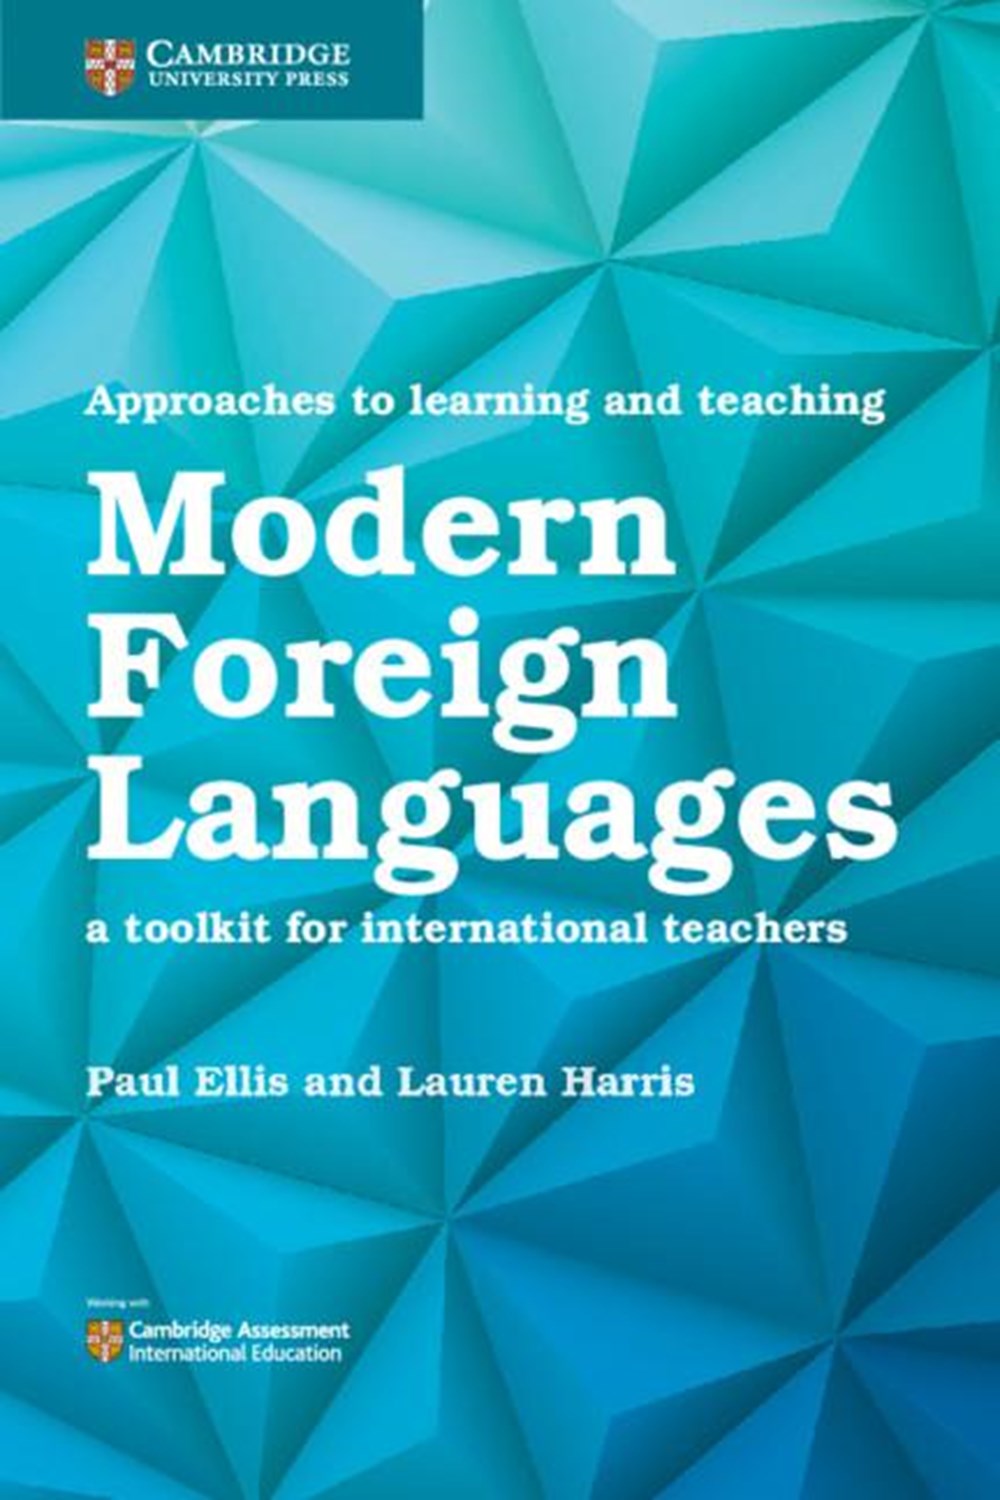 case study method in teaching foreign languages